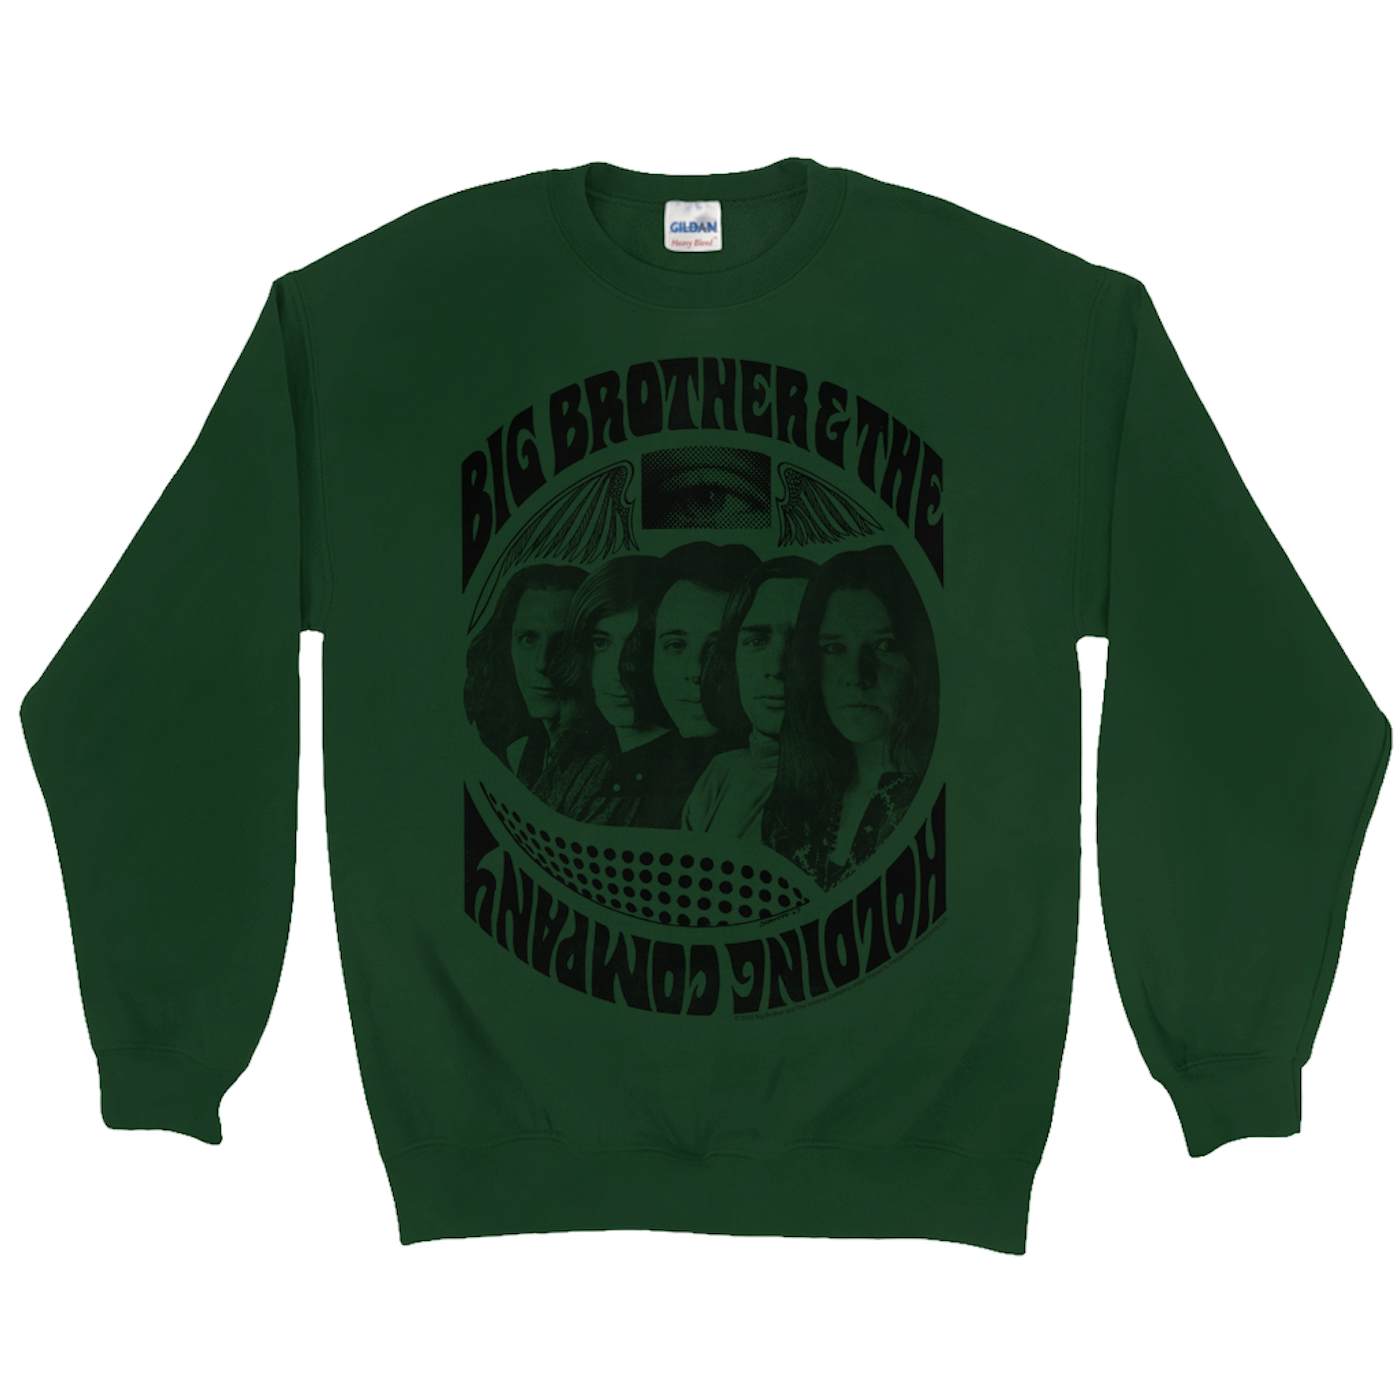 Big Brother and The Holding Co. Sweatshirt | Big Brother & The Holding Company Feat. Janis Joplin 1967 Poster Big Brother and The Holding Co. Sweatshirt